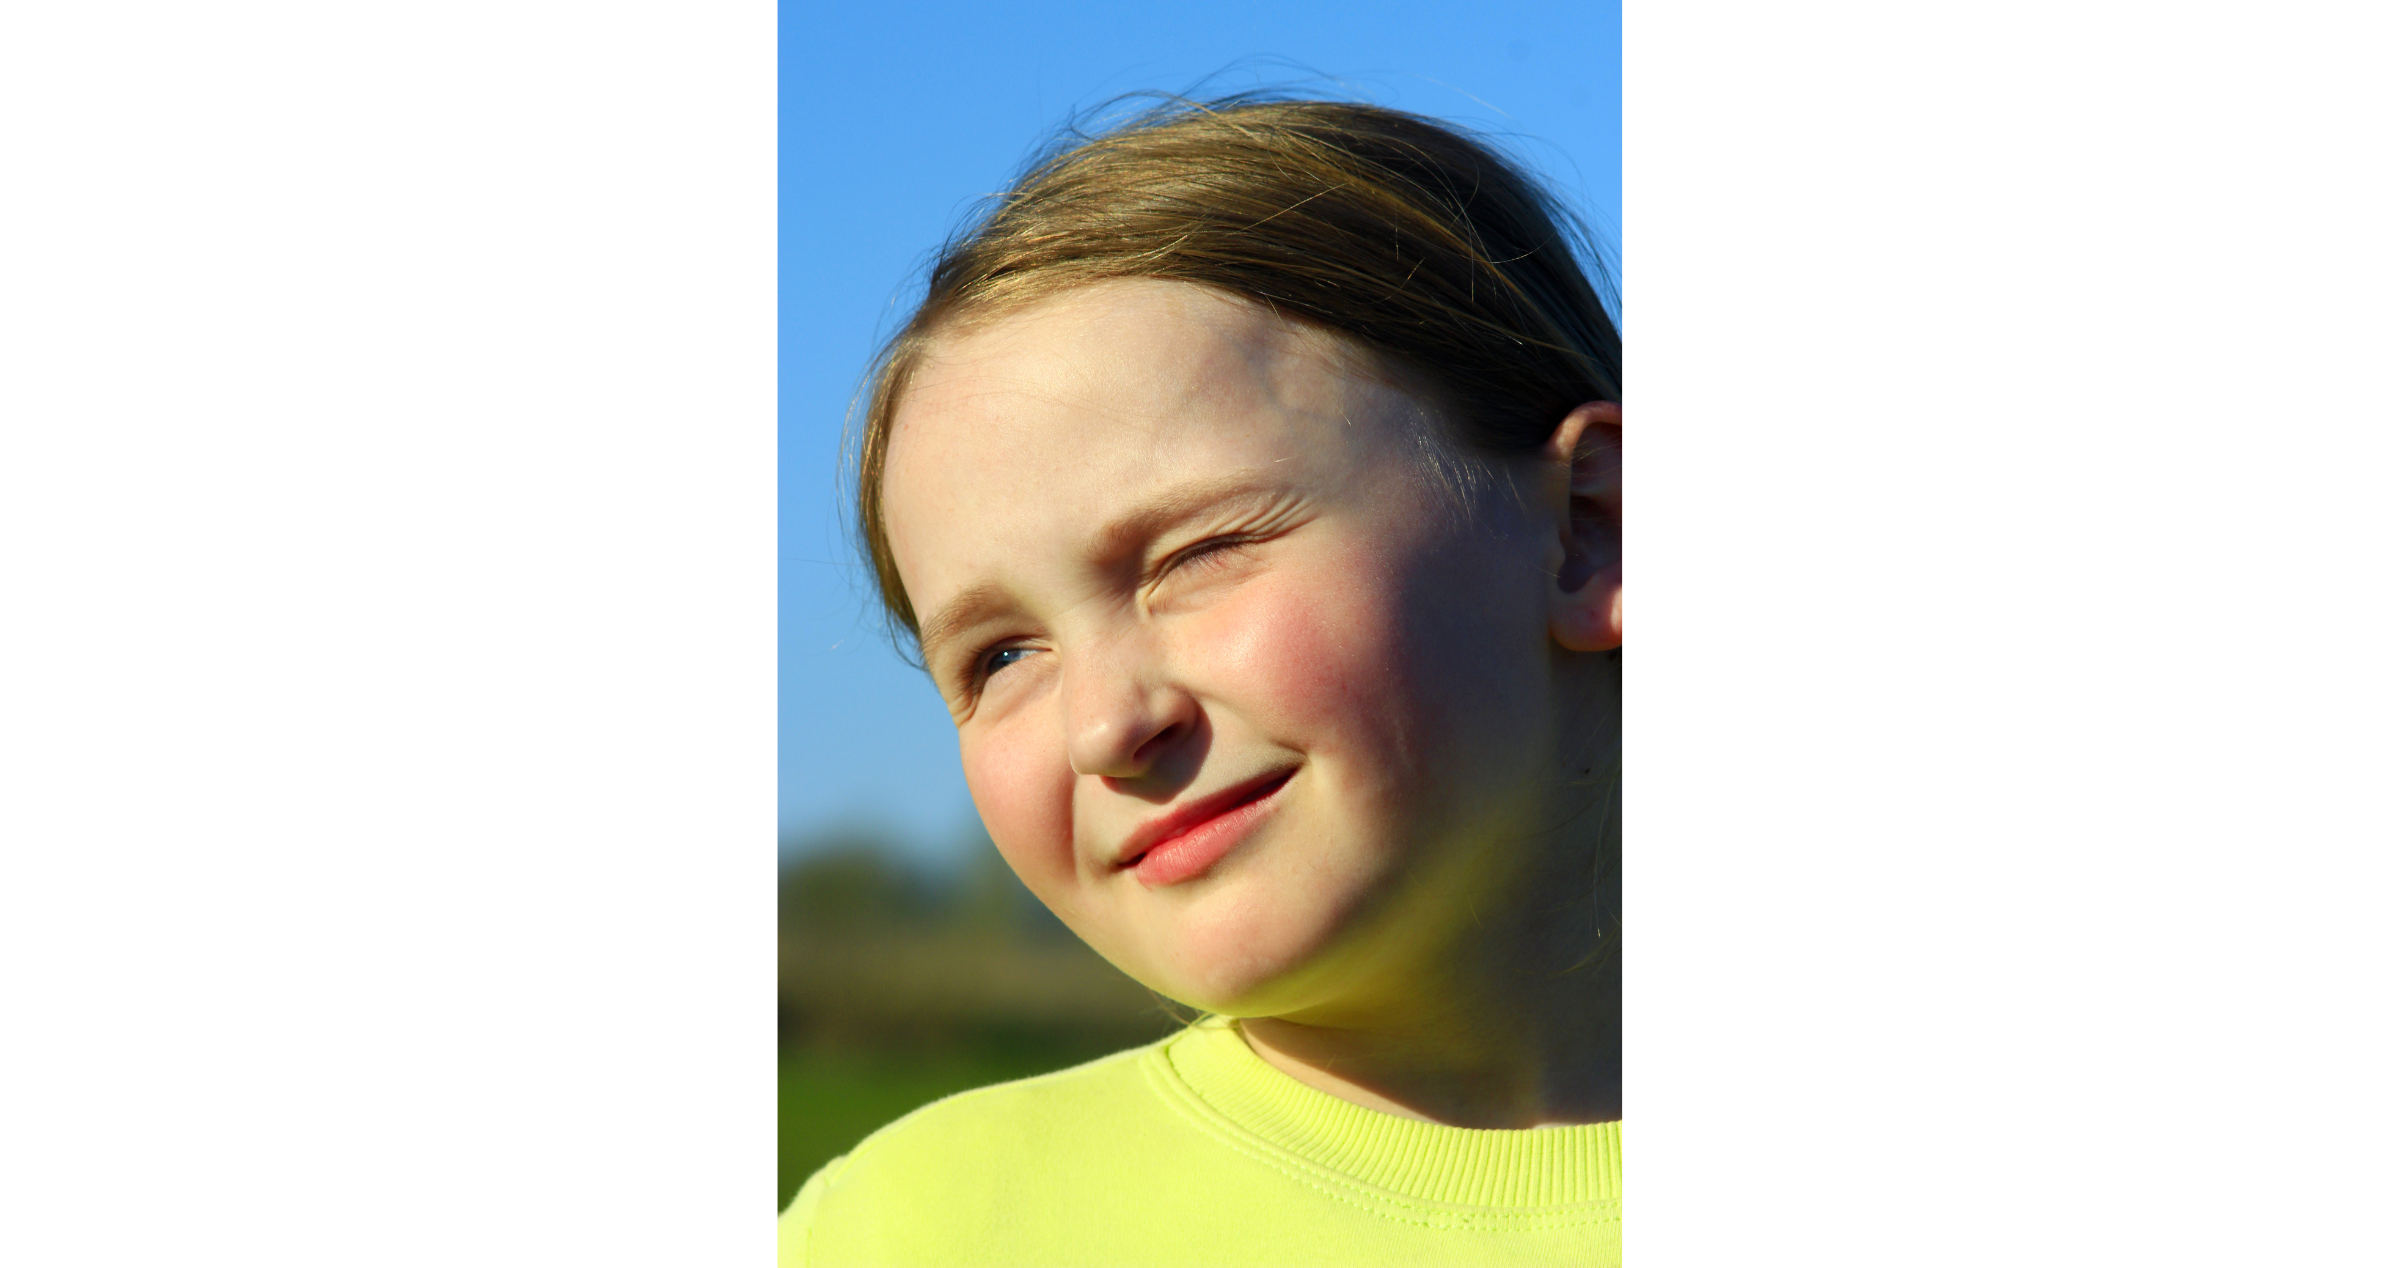 A young girl squinting into the sun